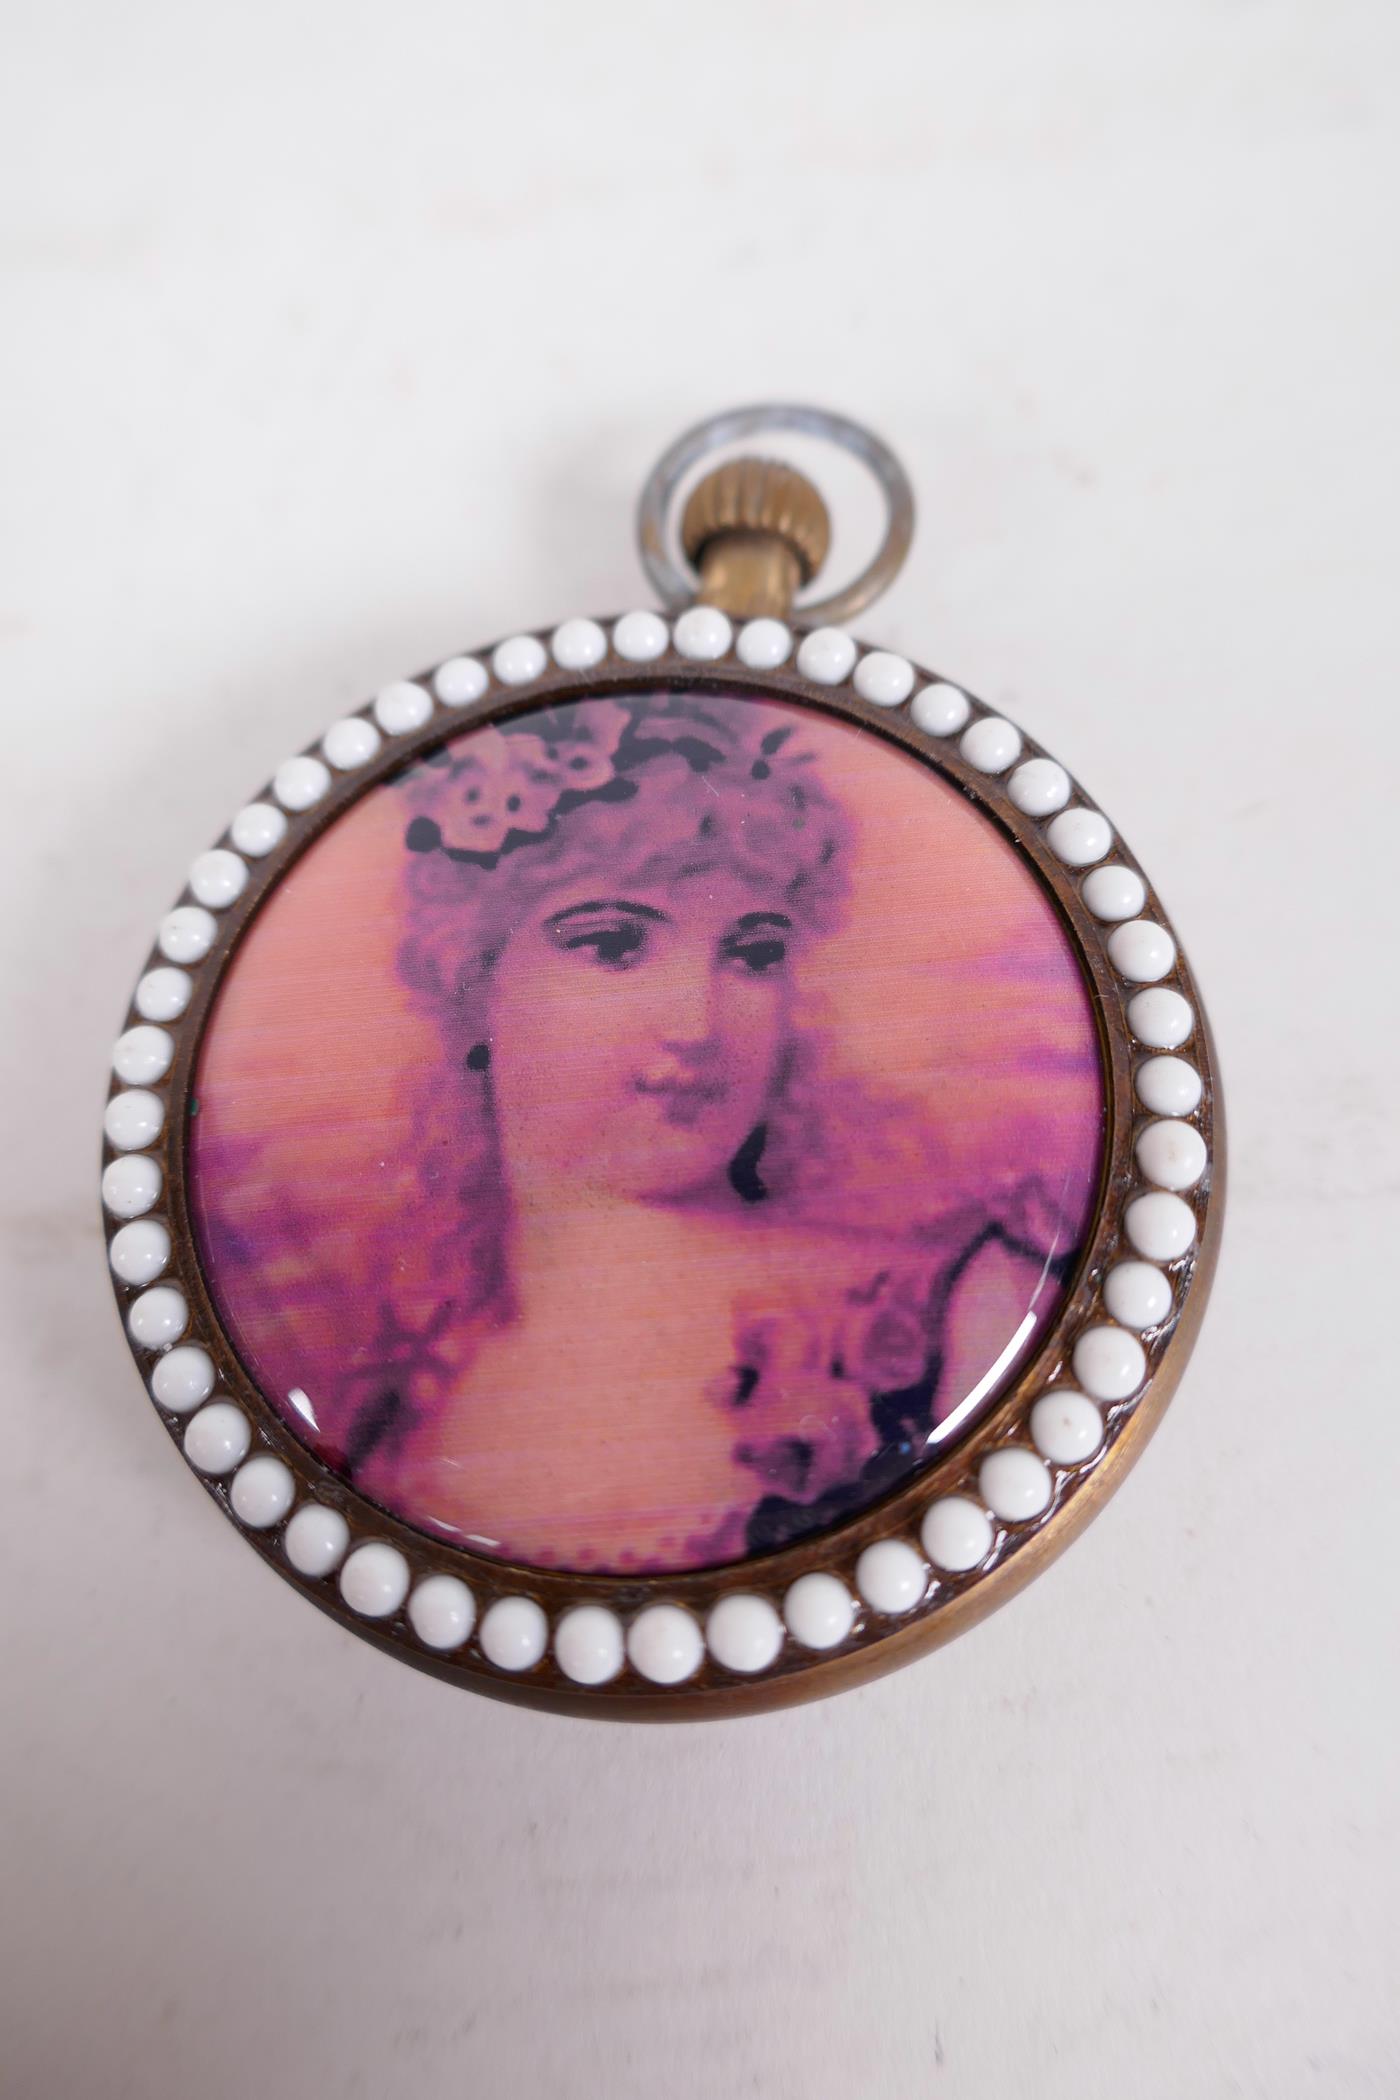 A replica top wind pocket watch set with a ring of pearl beads front and back, the back decorated - Image 2 of 2